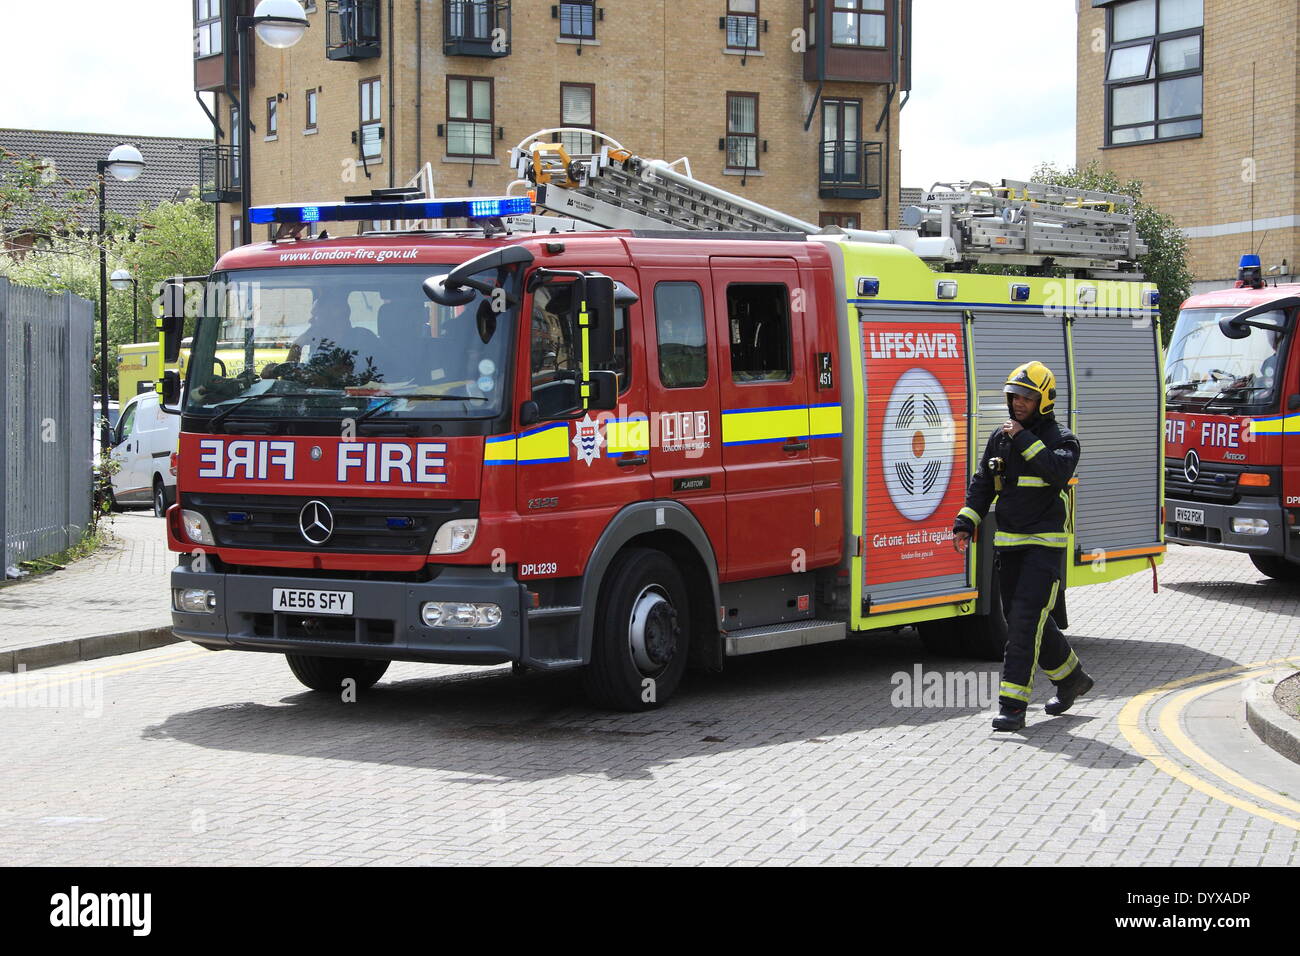 London, UK. 26th Apr, 2014. Saturday saw Firefighters were amongst over 220 emergency services personnel taking part in a large exercise in East London. The simulated crash of a Boeing 737 into a building, provided rescuers with over 100 casualties to rescue. A number of casualties were plucked from water by rescue boats. The exercise is due to last three days. Credit:  HOT SHOTS/Alamy Live News Stock Photo